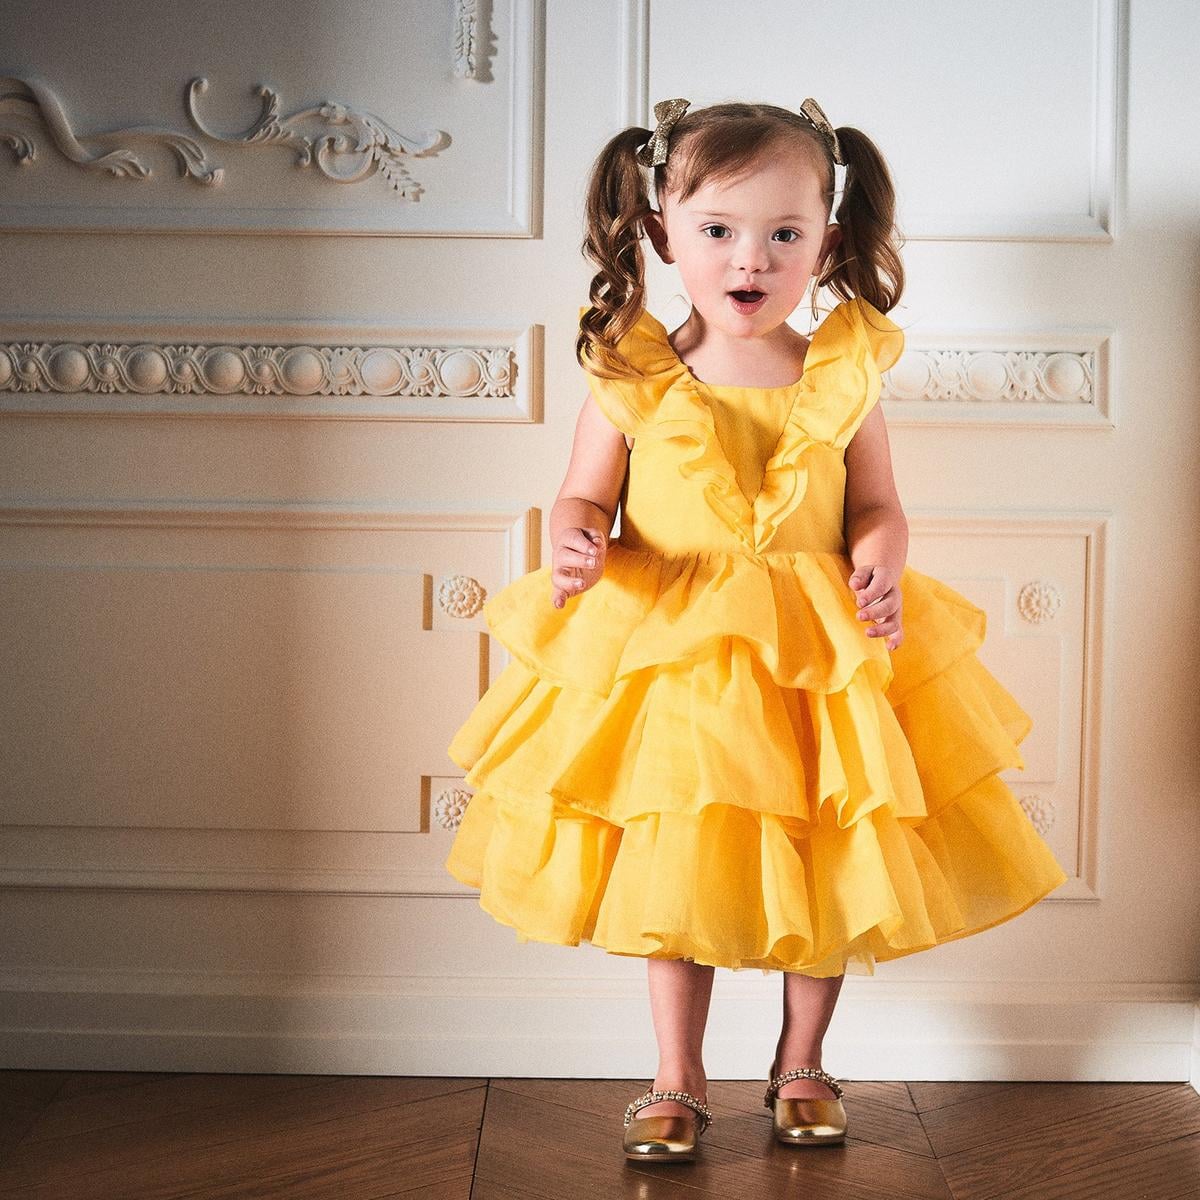 Cute Janie and Jack Dress Baby Girl 12 18 months Gold Light Yellow